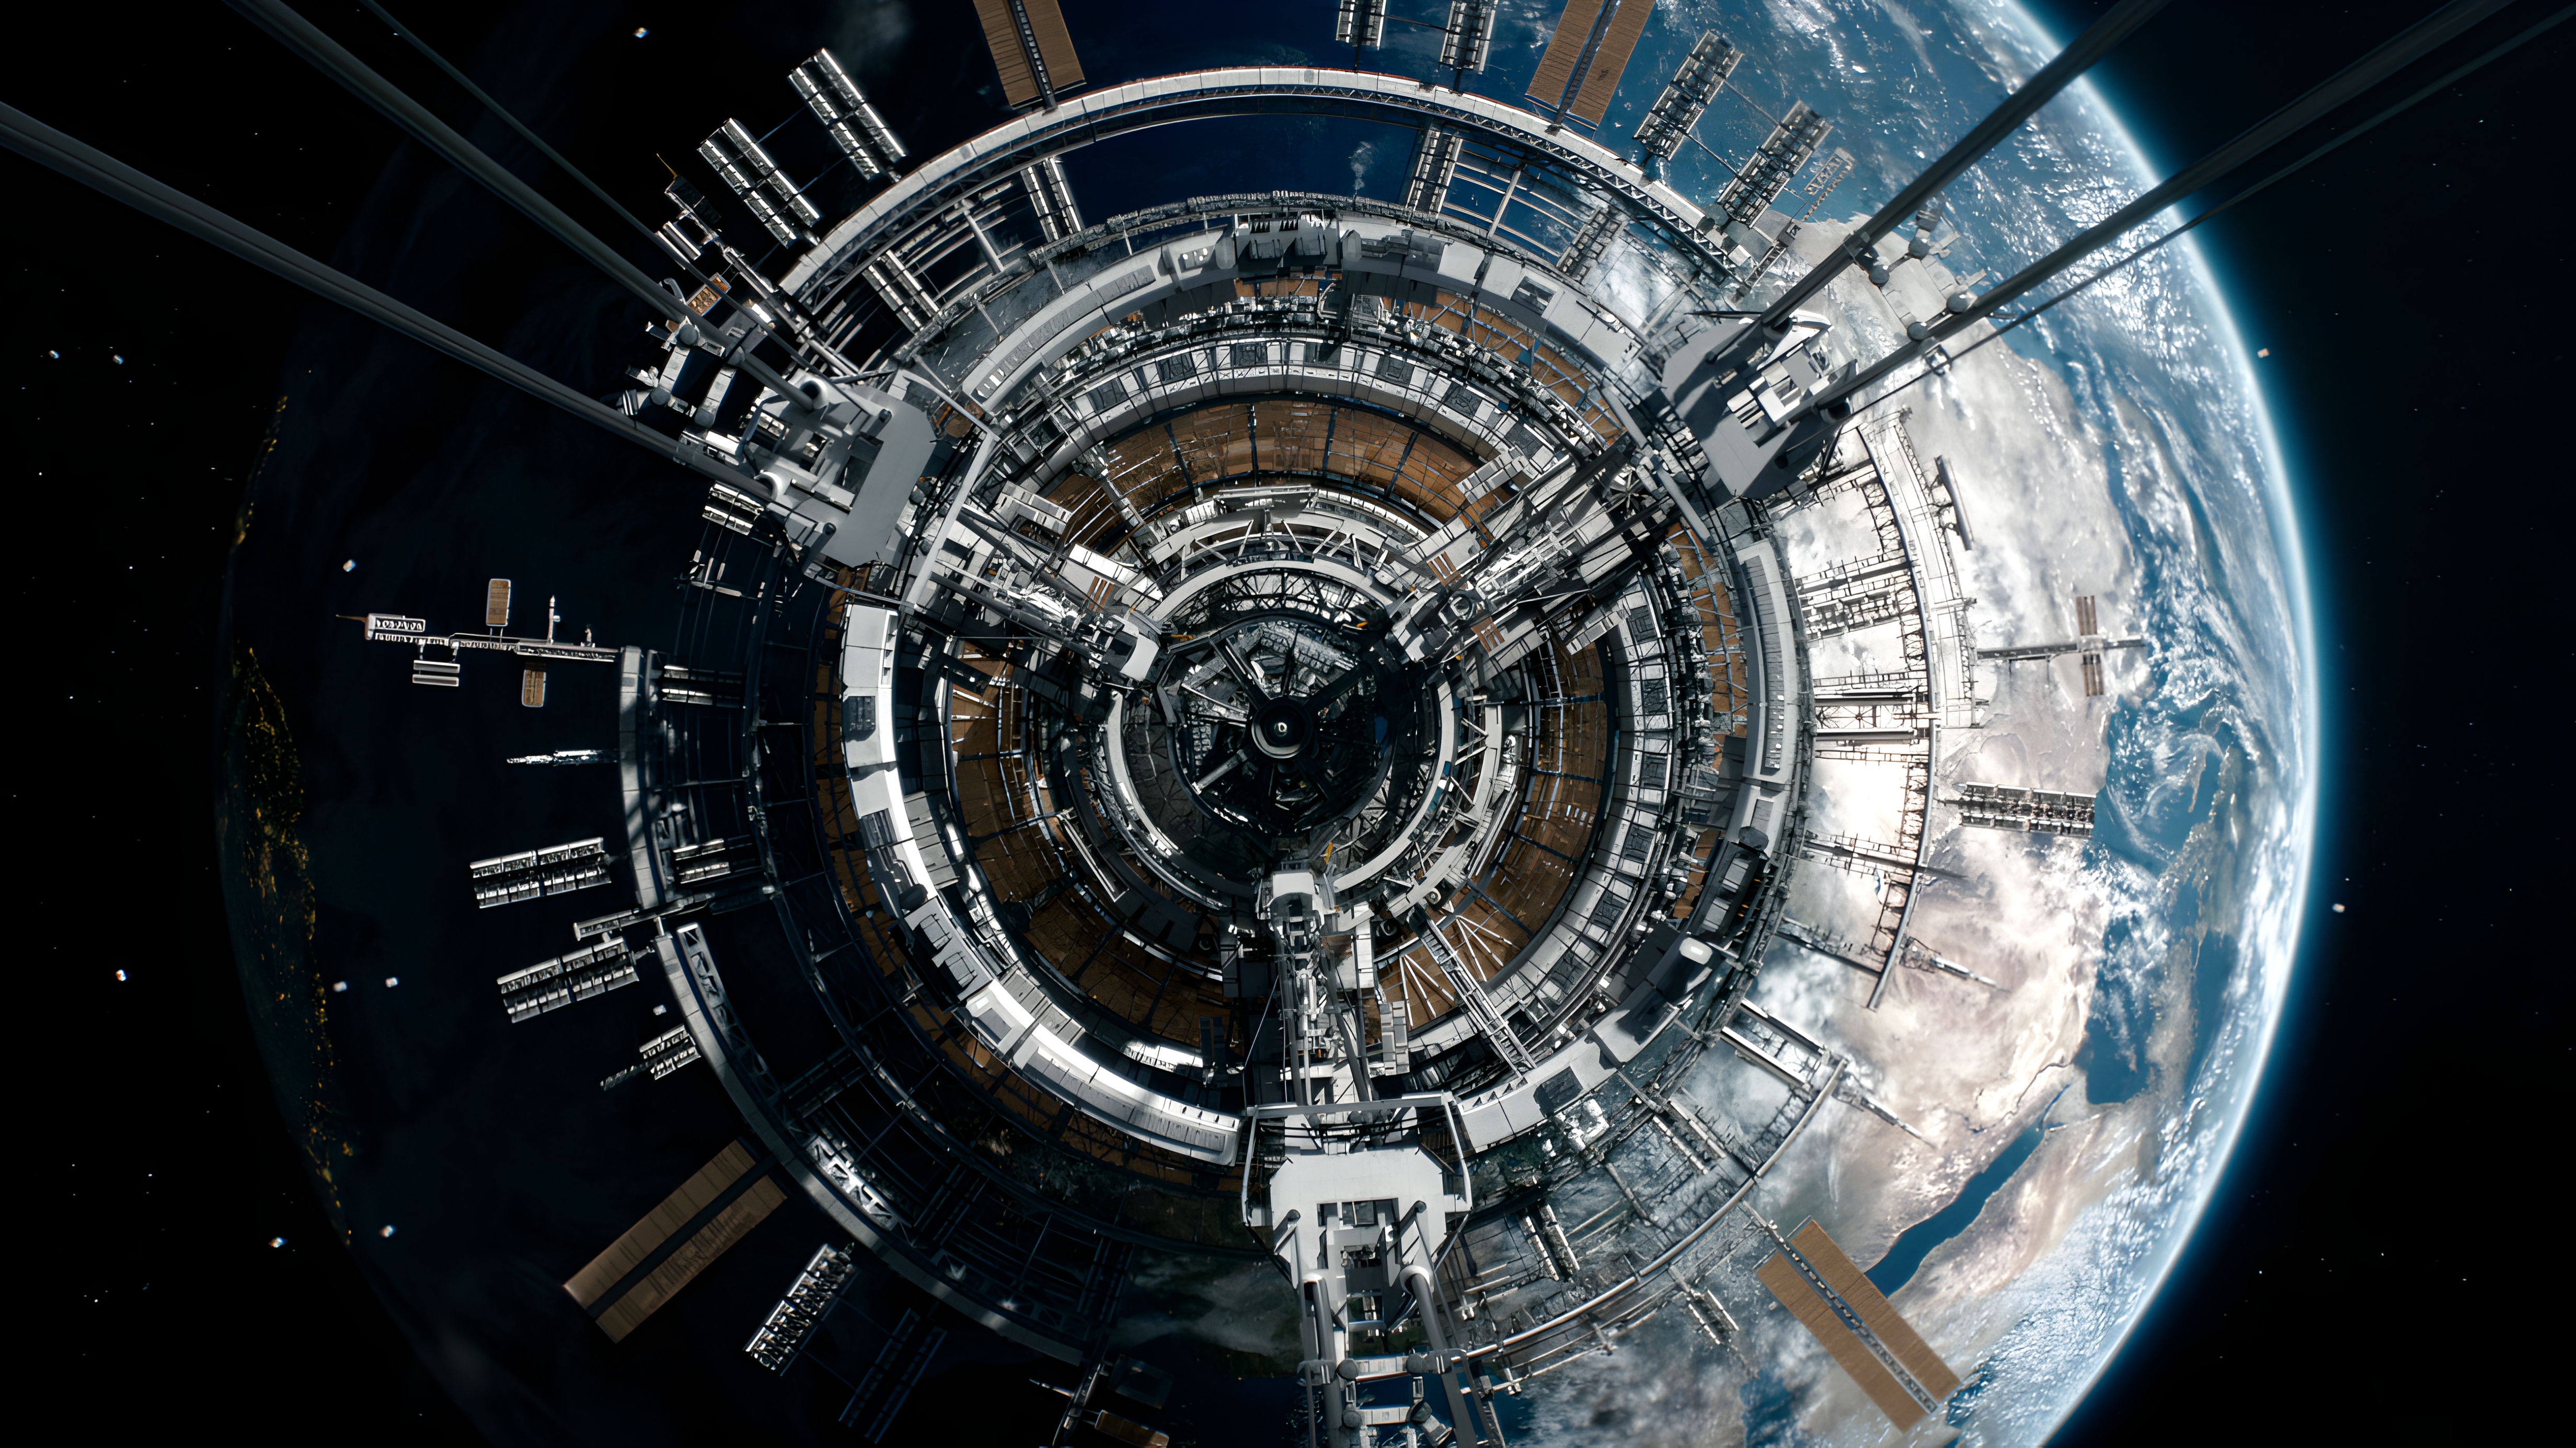 General 4928x2771 The Wandering Earth 2 movies space shuttle space space station